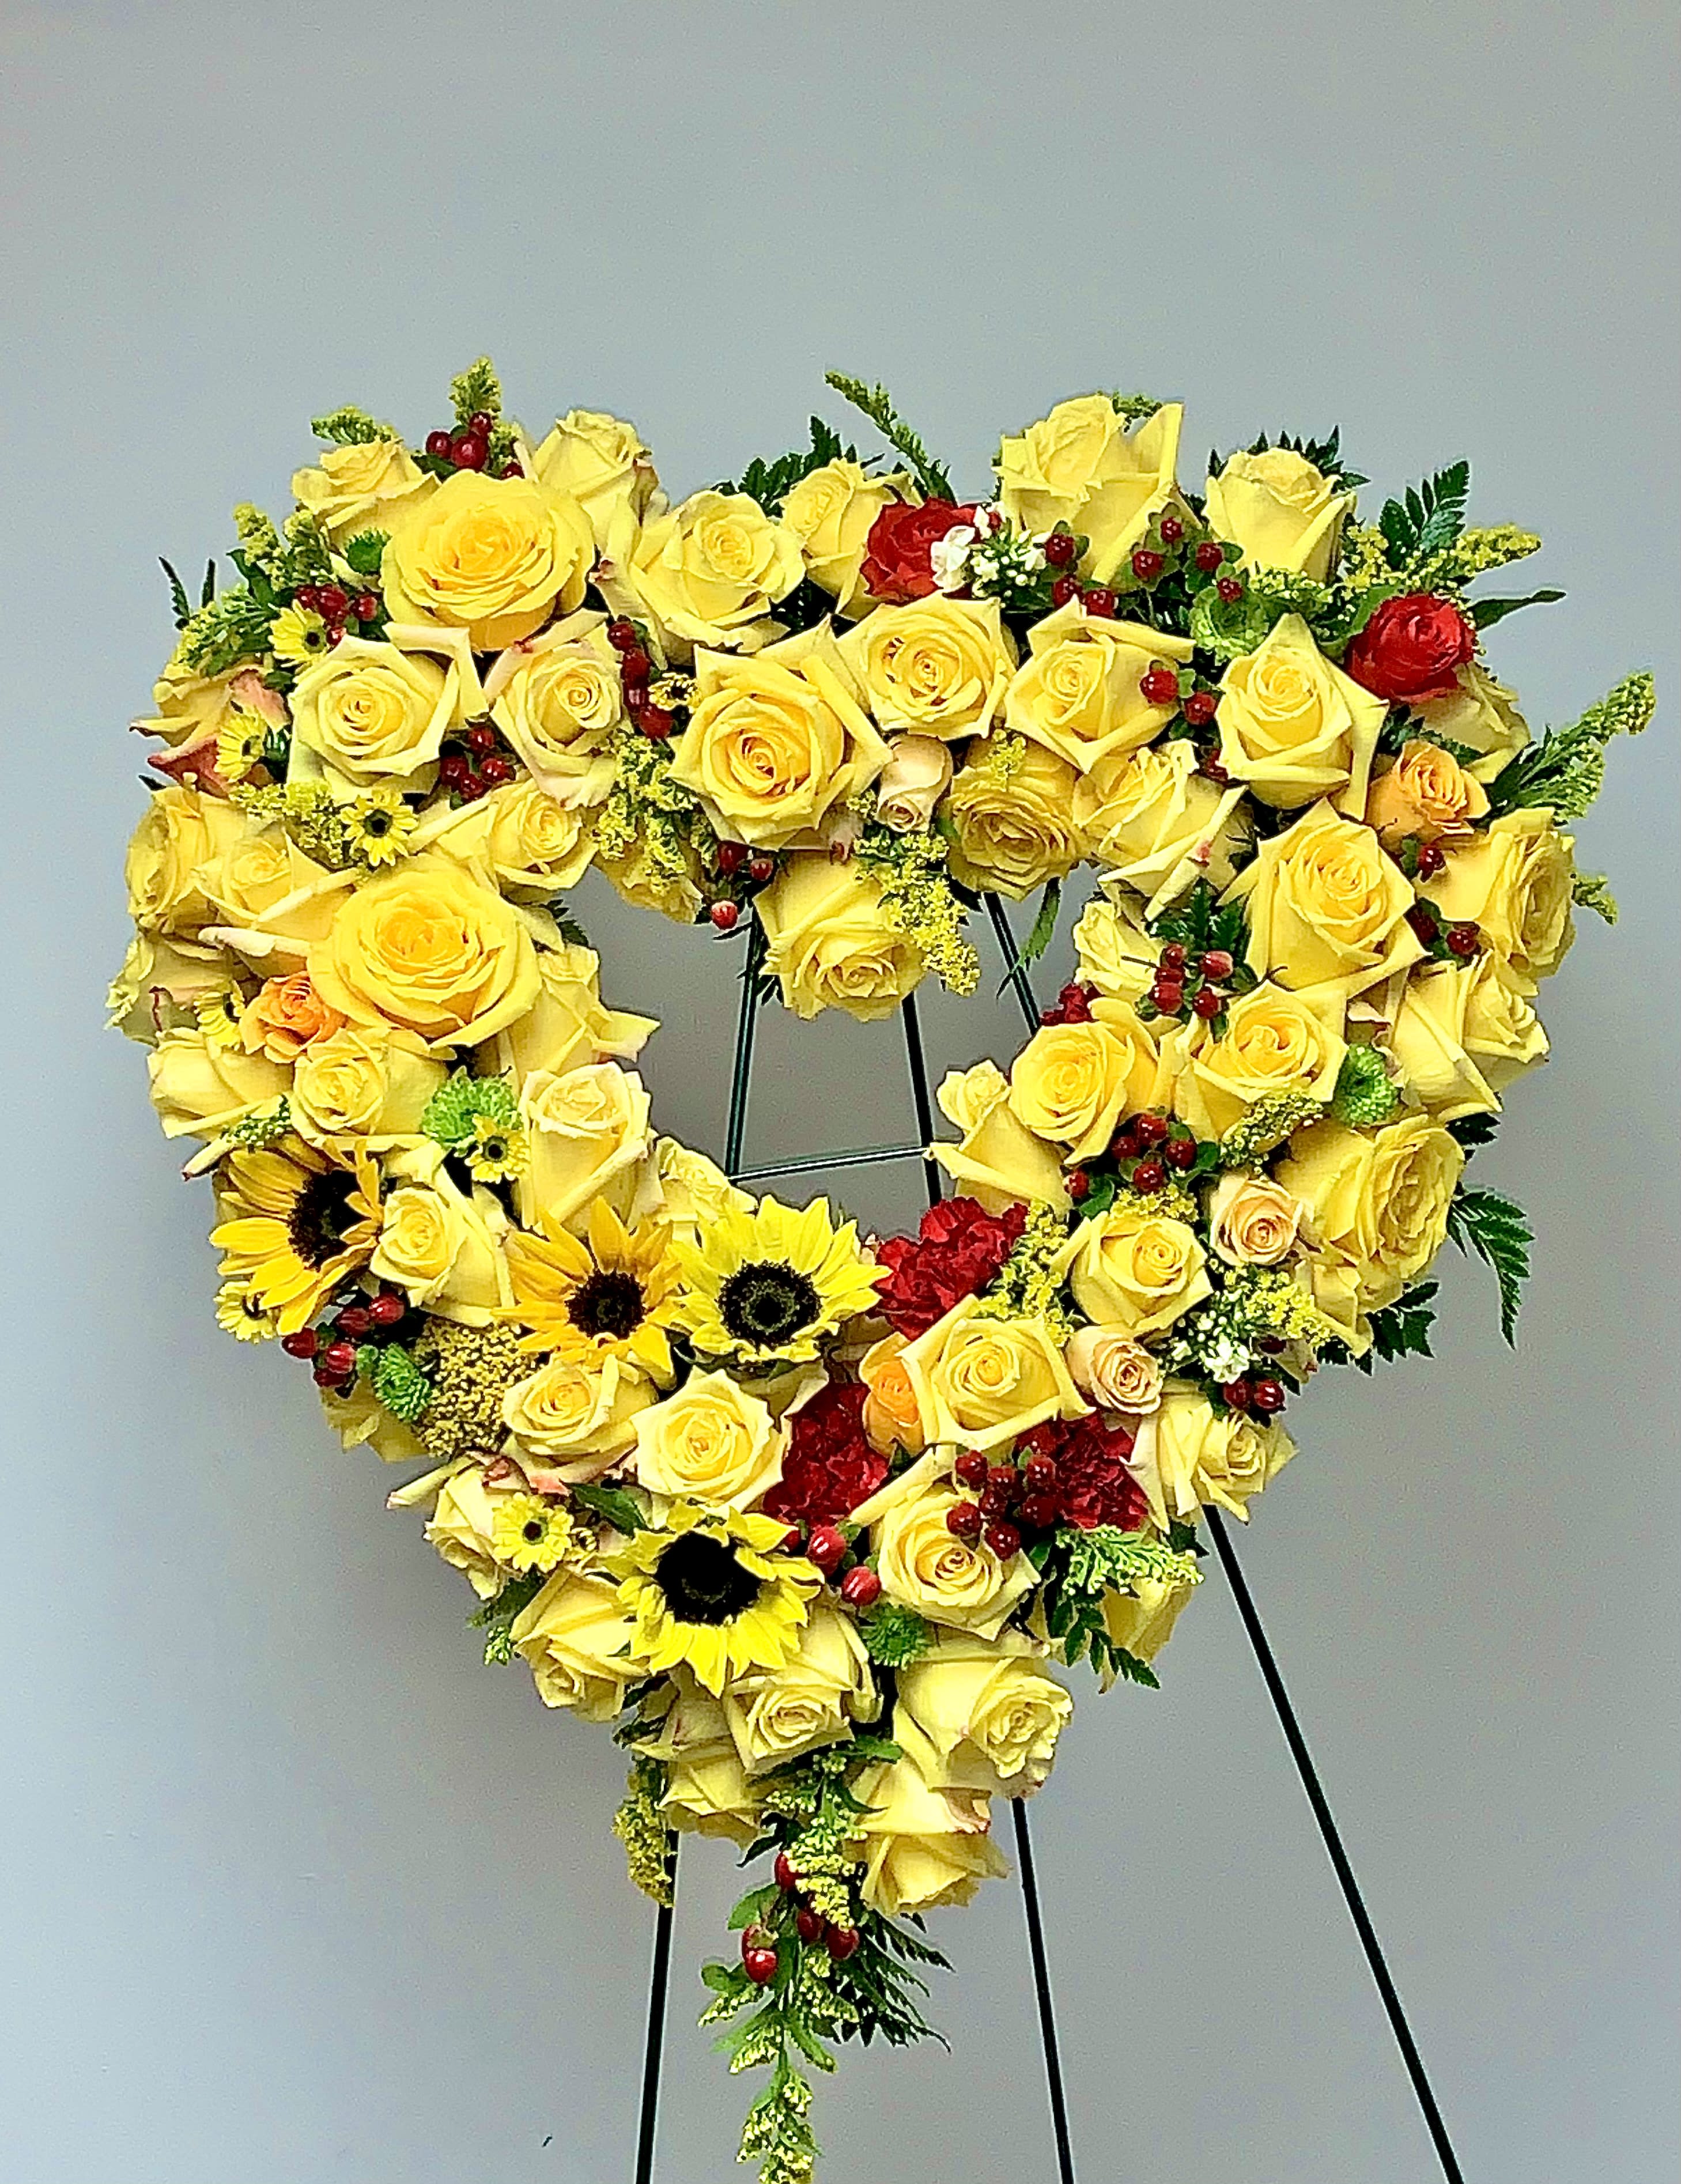 Sunshine Heart  - The forever sunshine heart is an array of beautiful bright yellow roses and sunflowers. Your beloved ones memory will forever remain shining through.